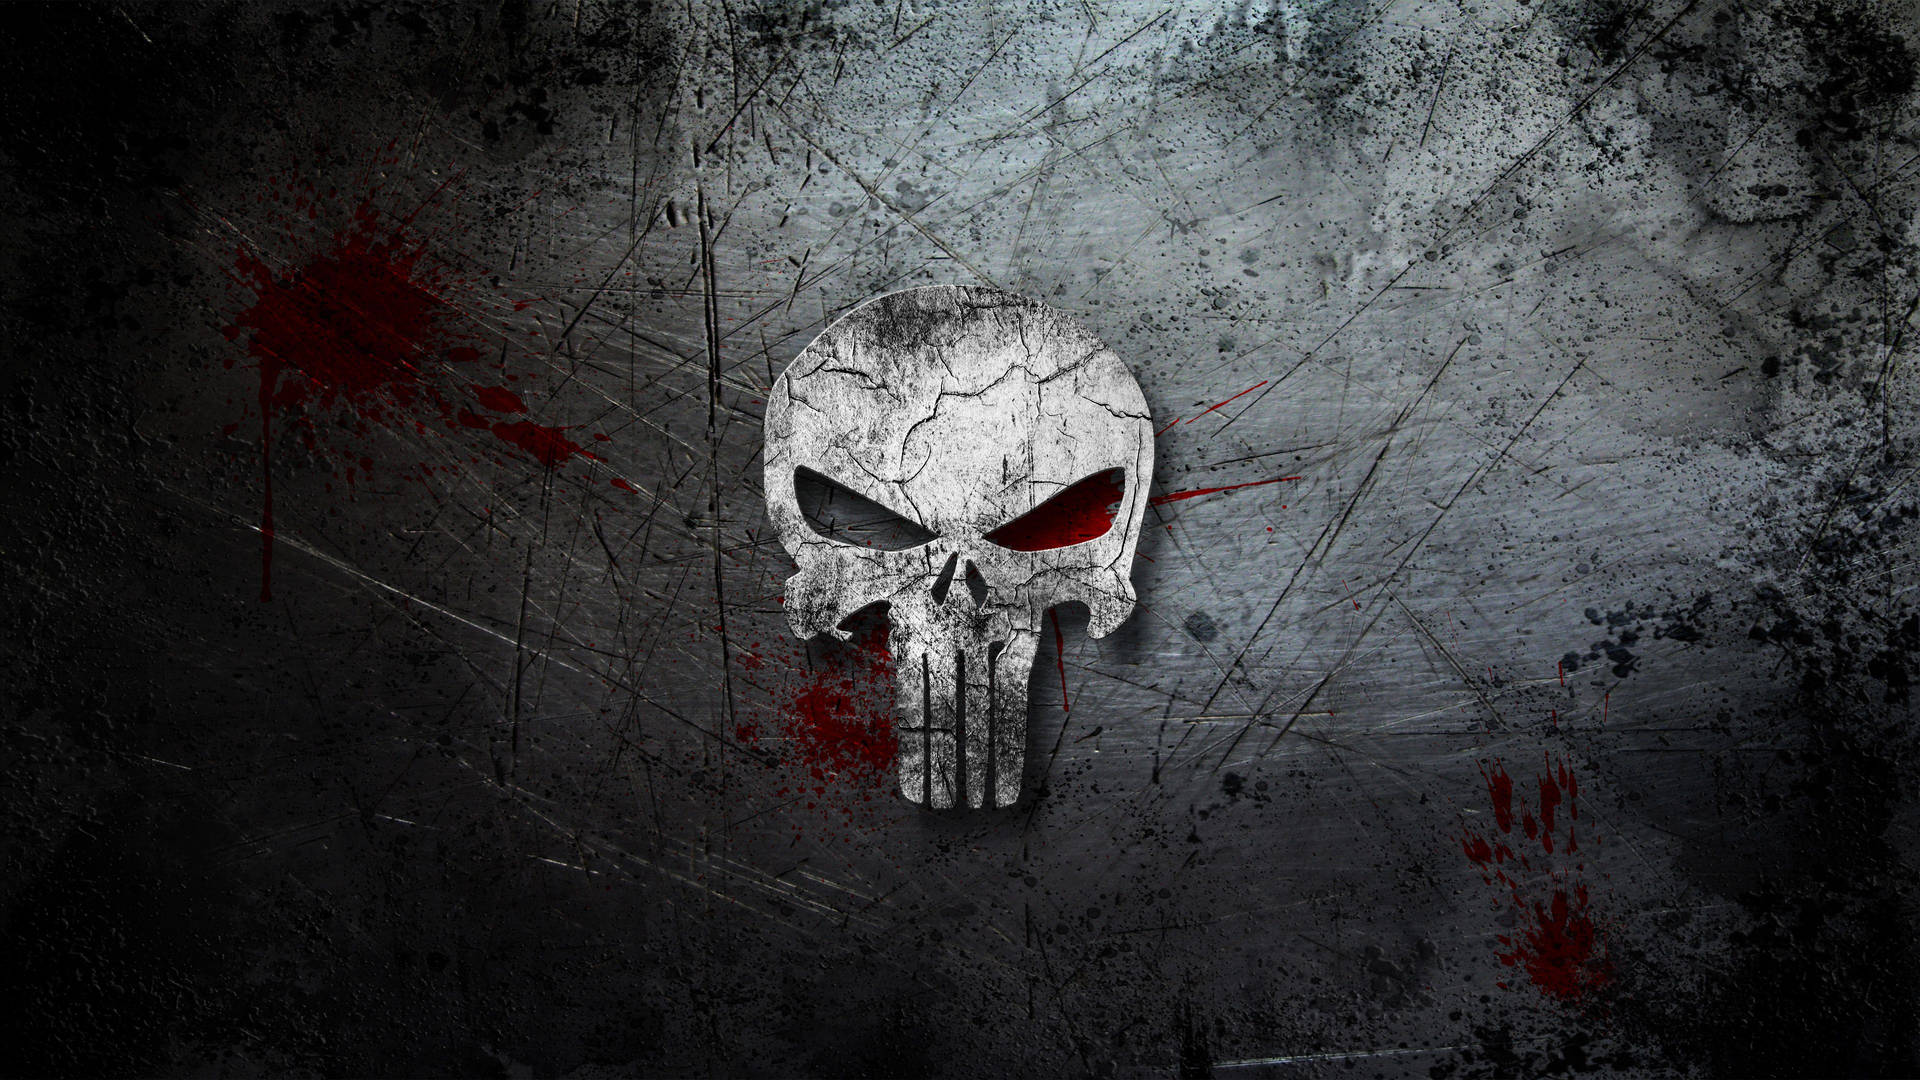 Top 999+ Punisher Wallpaper Full HD, 4K✅Free to Use